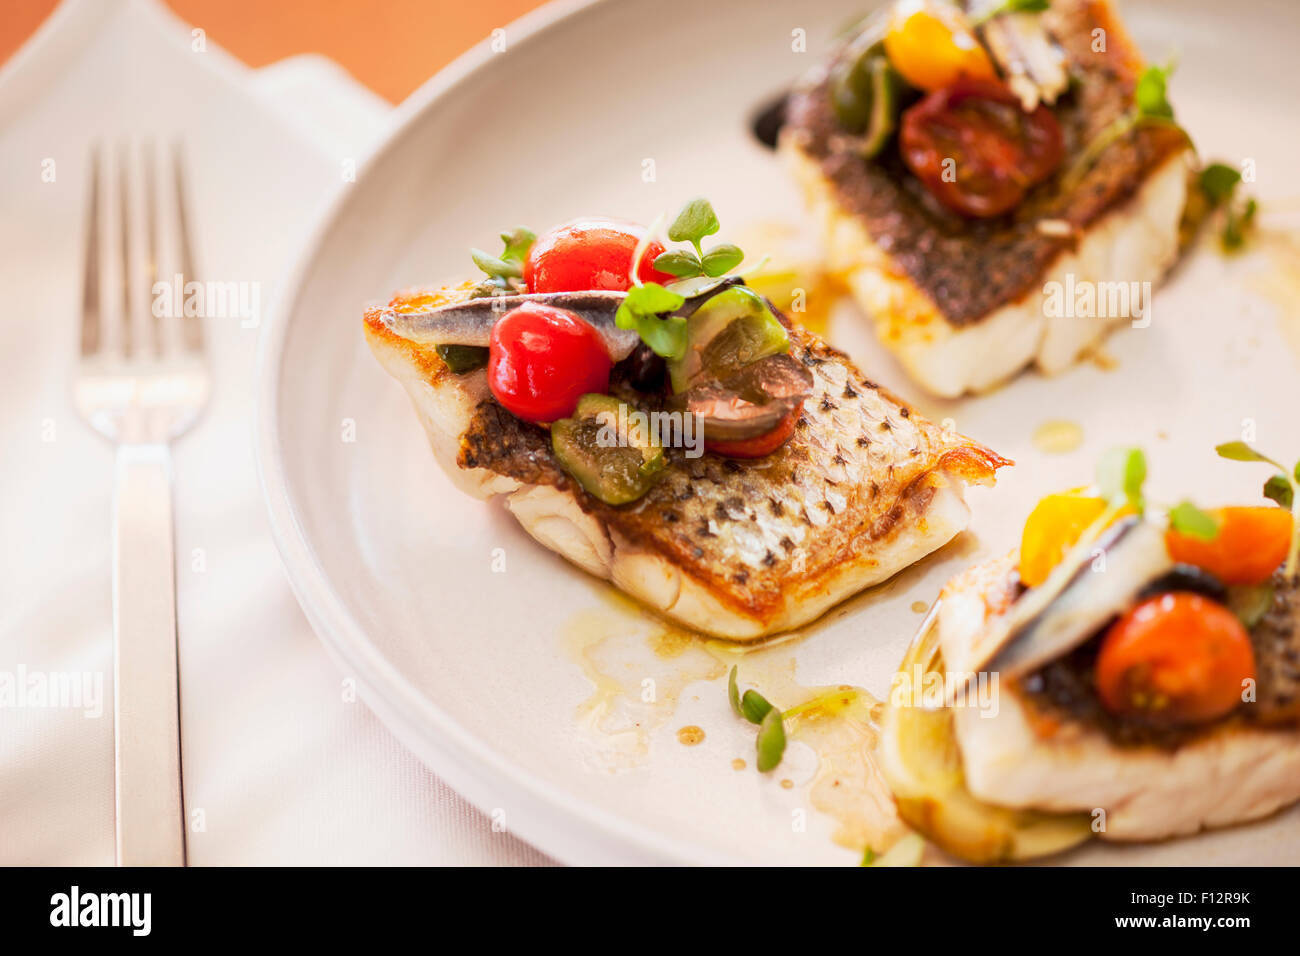 striped bass with cherry tomatoes, olives and anchovy, Tydes Restaurant, Coral Casino, Biltmore Hotel, Santa Barbara, California Stock Photo